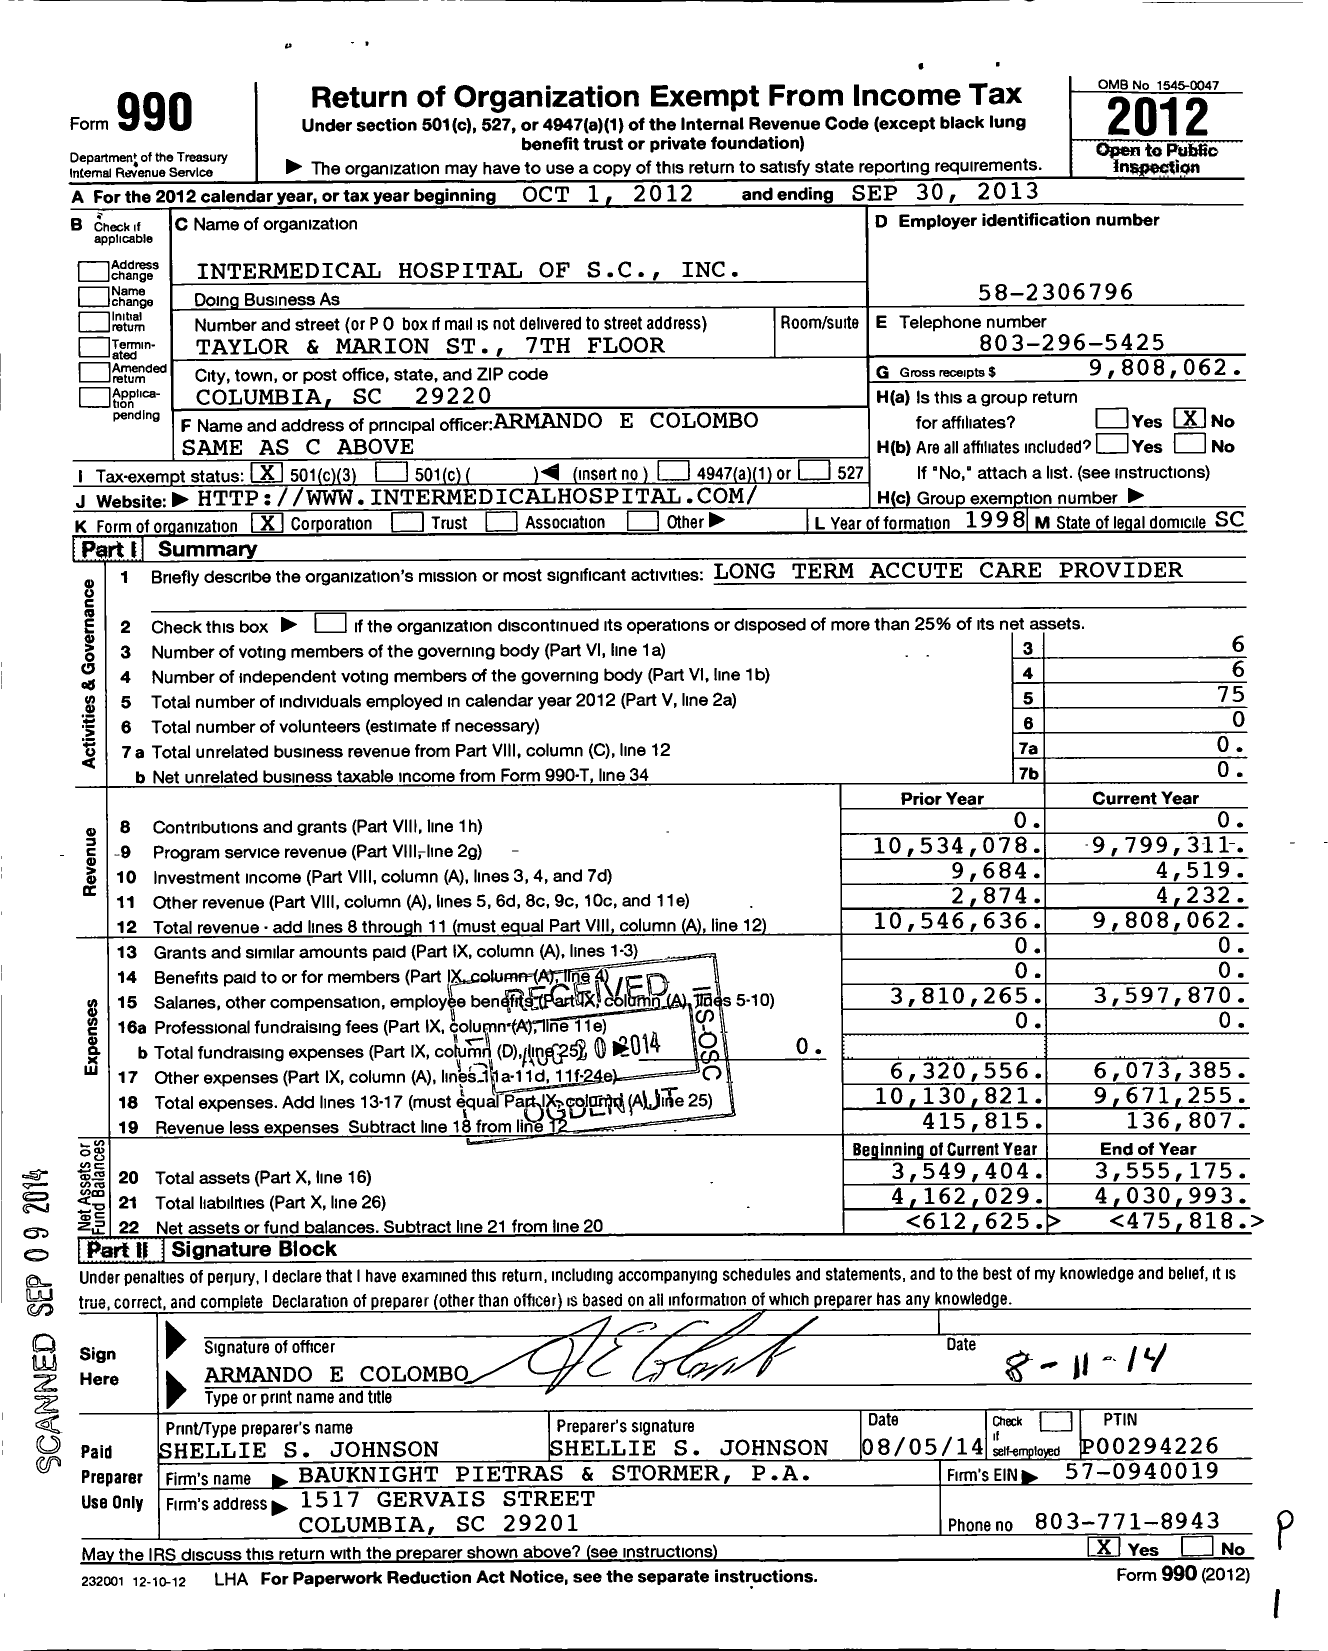 Image of first page of 2012 Form 990 for Intermedical Hospital of SC